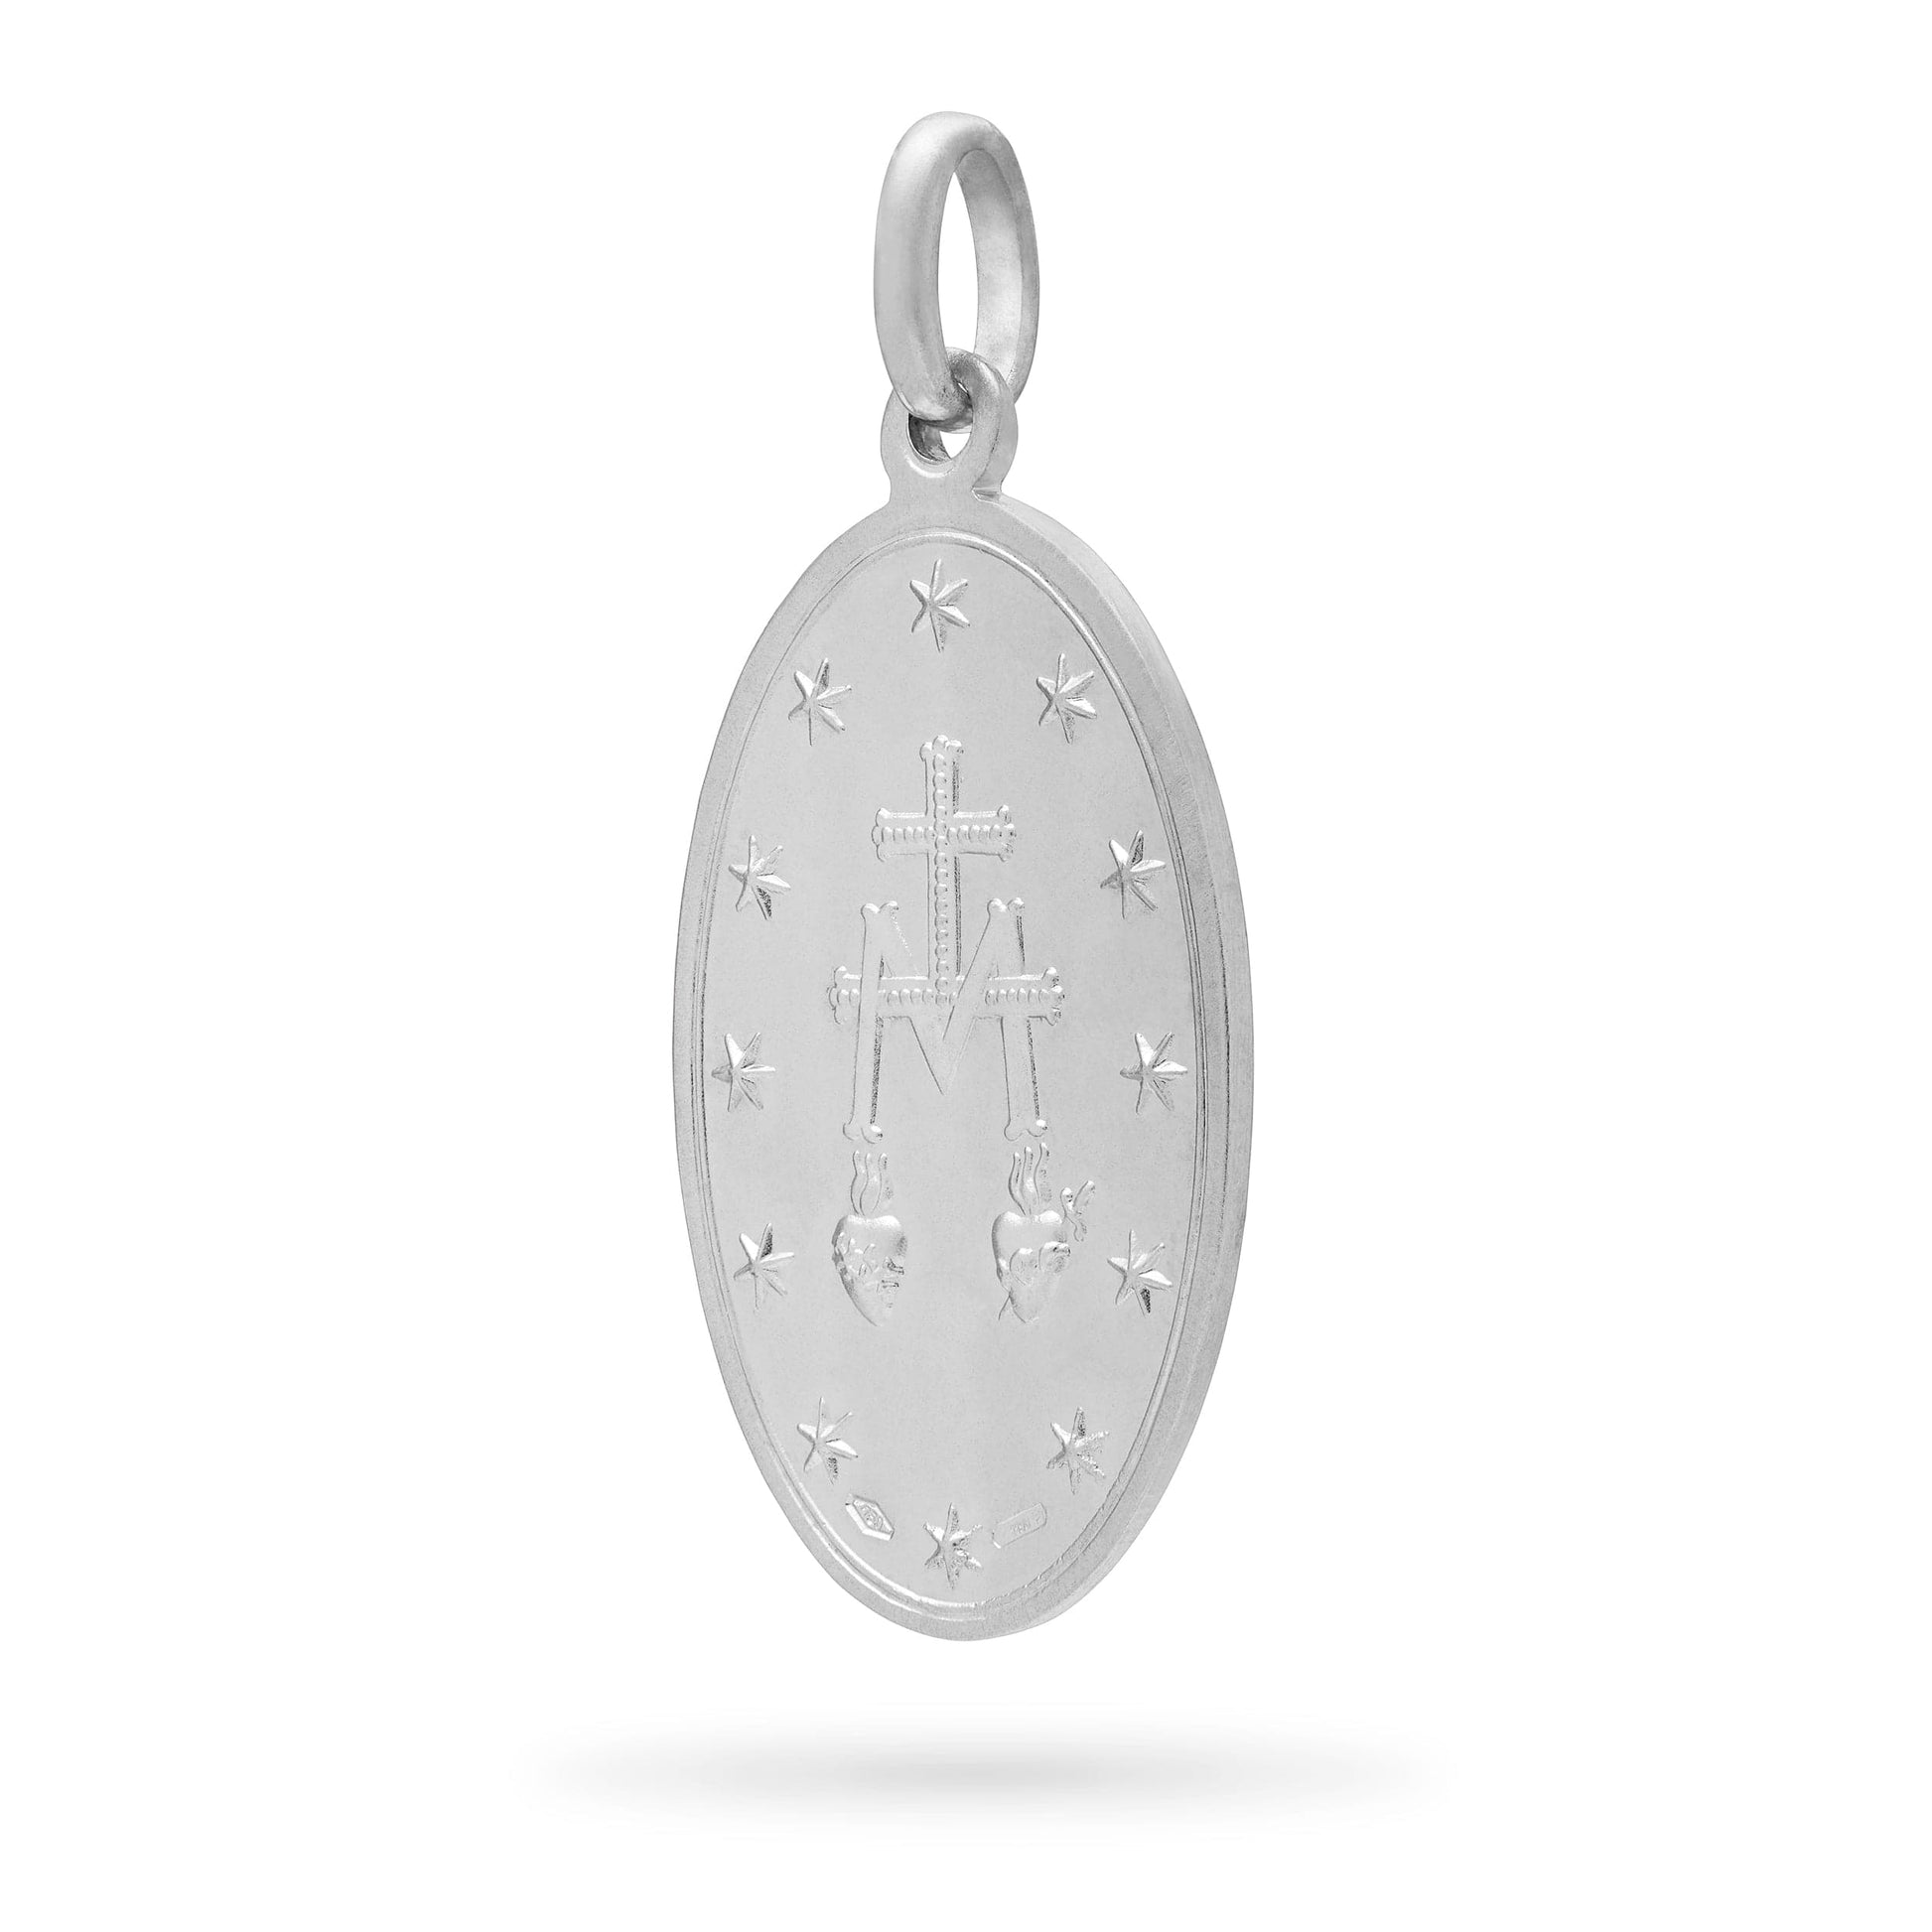 MONDO CATTOLICO Jewelry White Gold Miraculous Medal